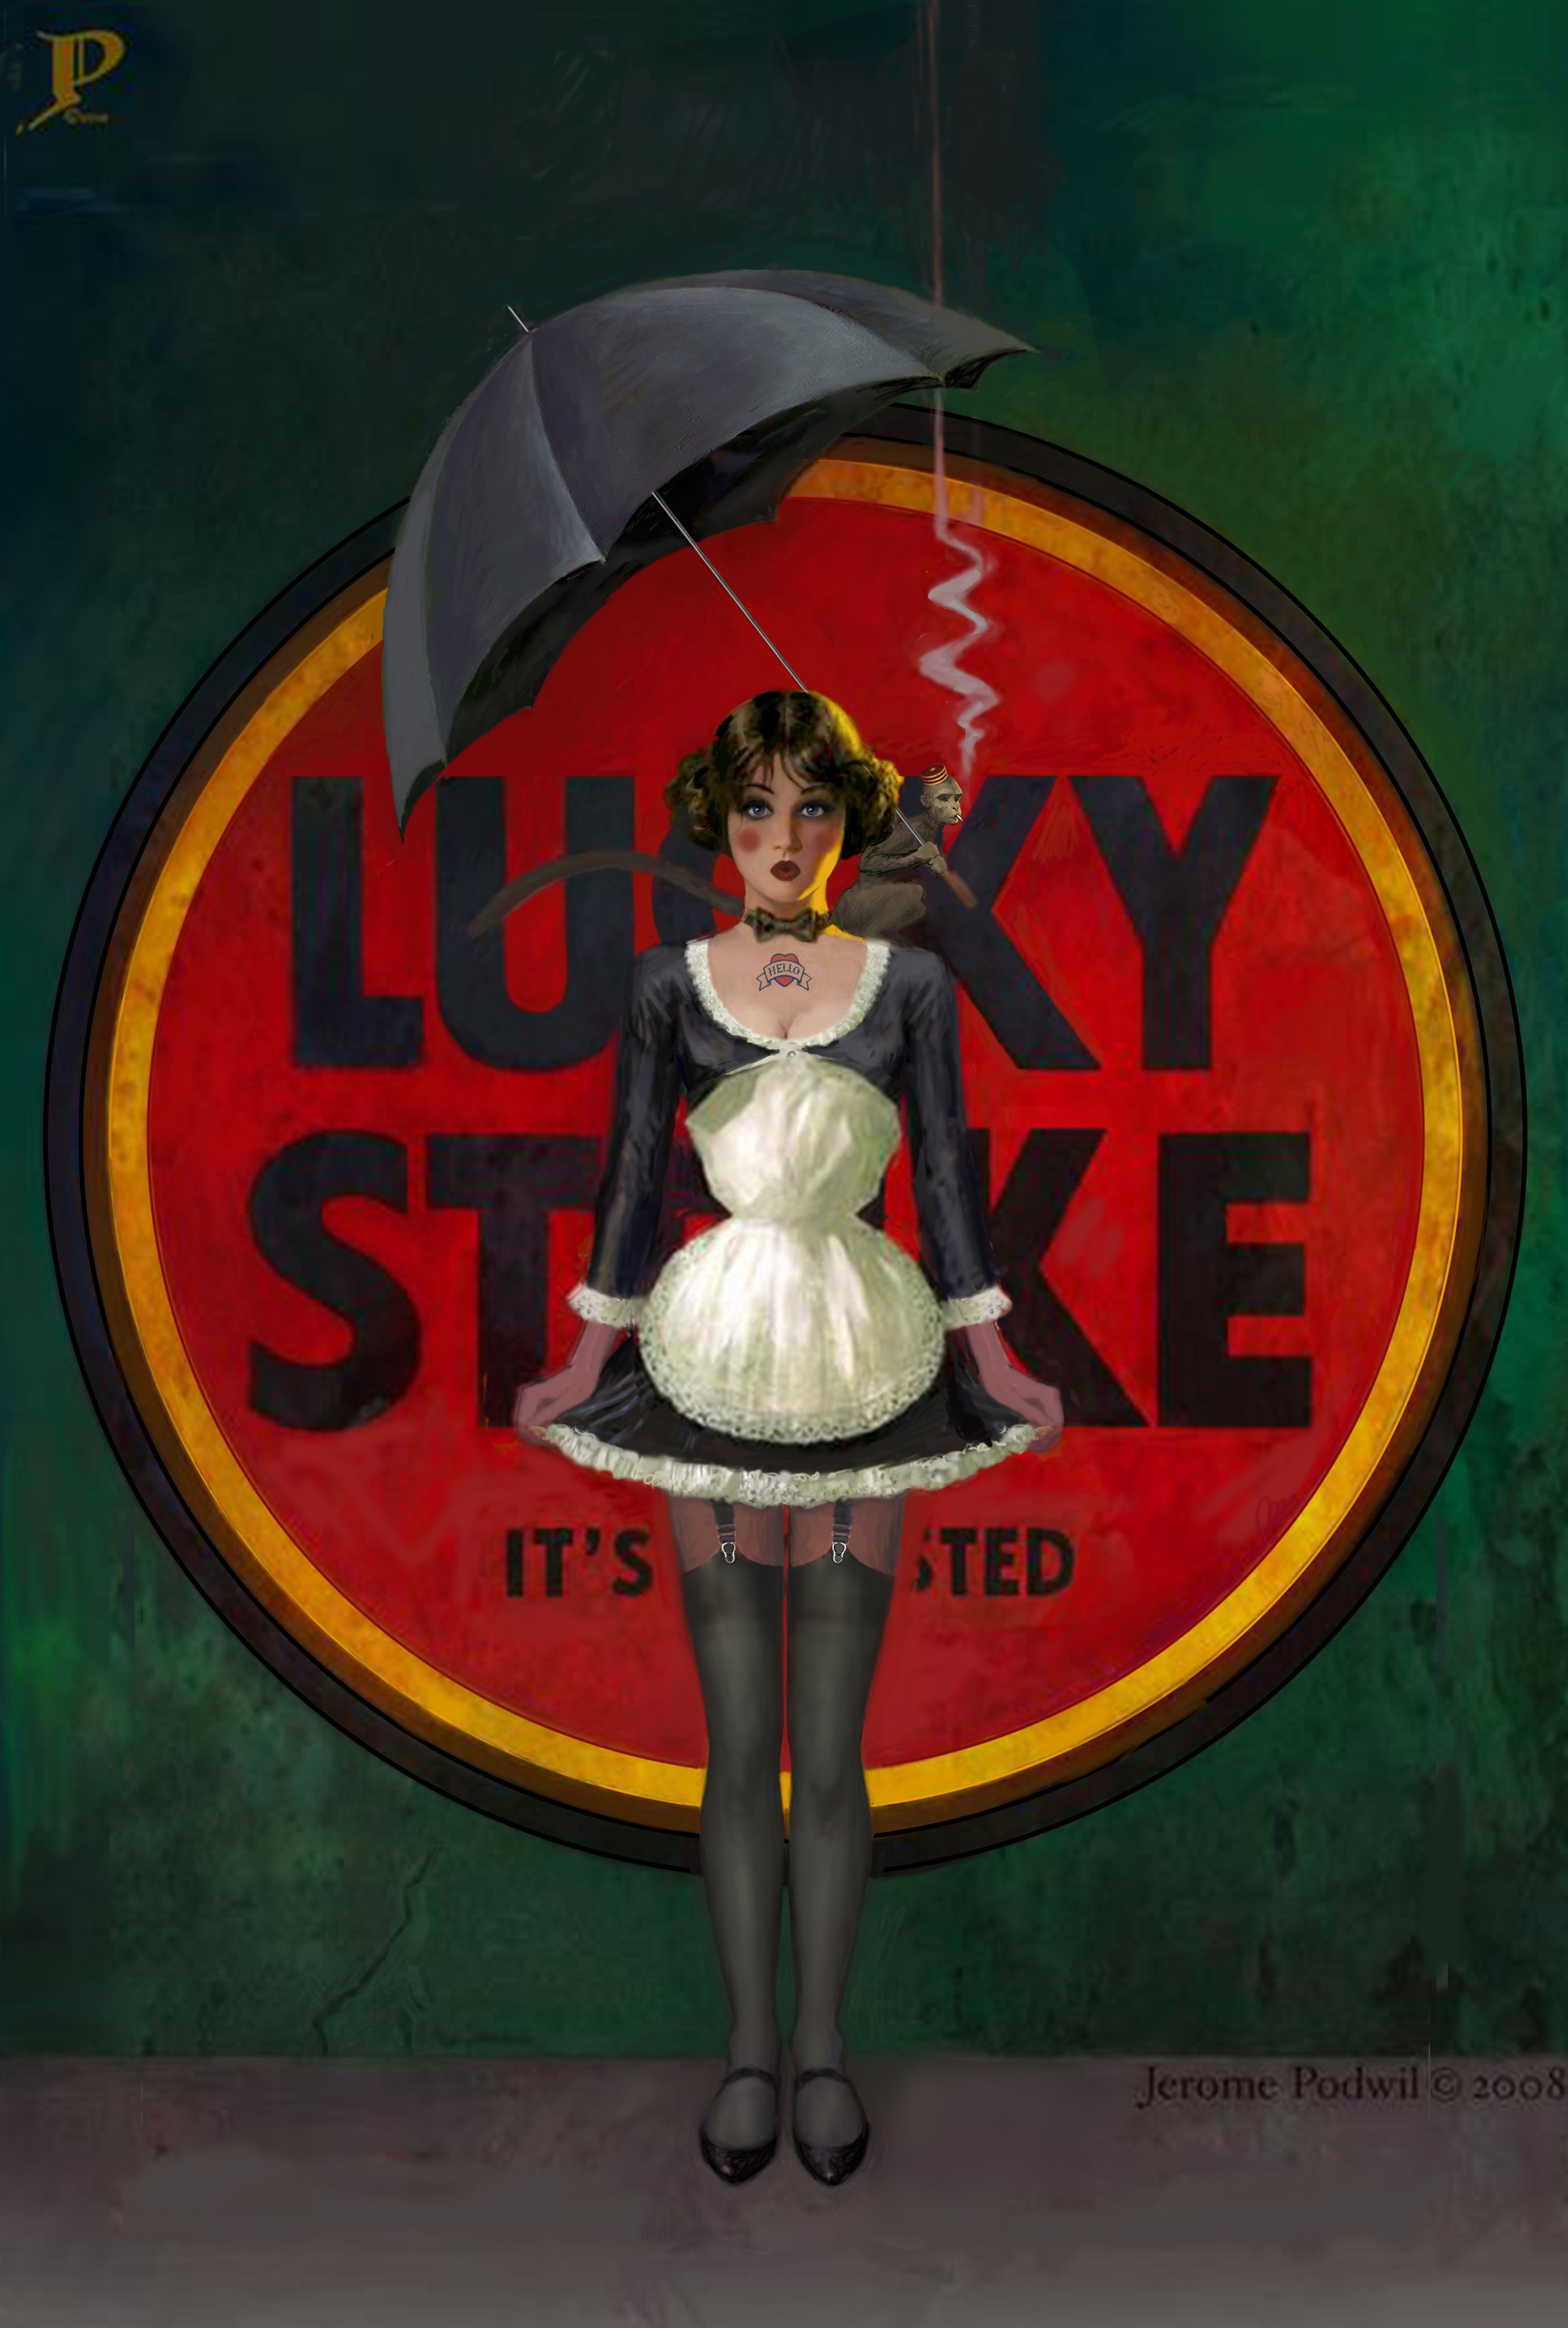 Lucky Strike wallpaper, Products, HQ Lucky Strike pictureK